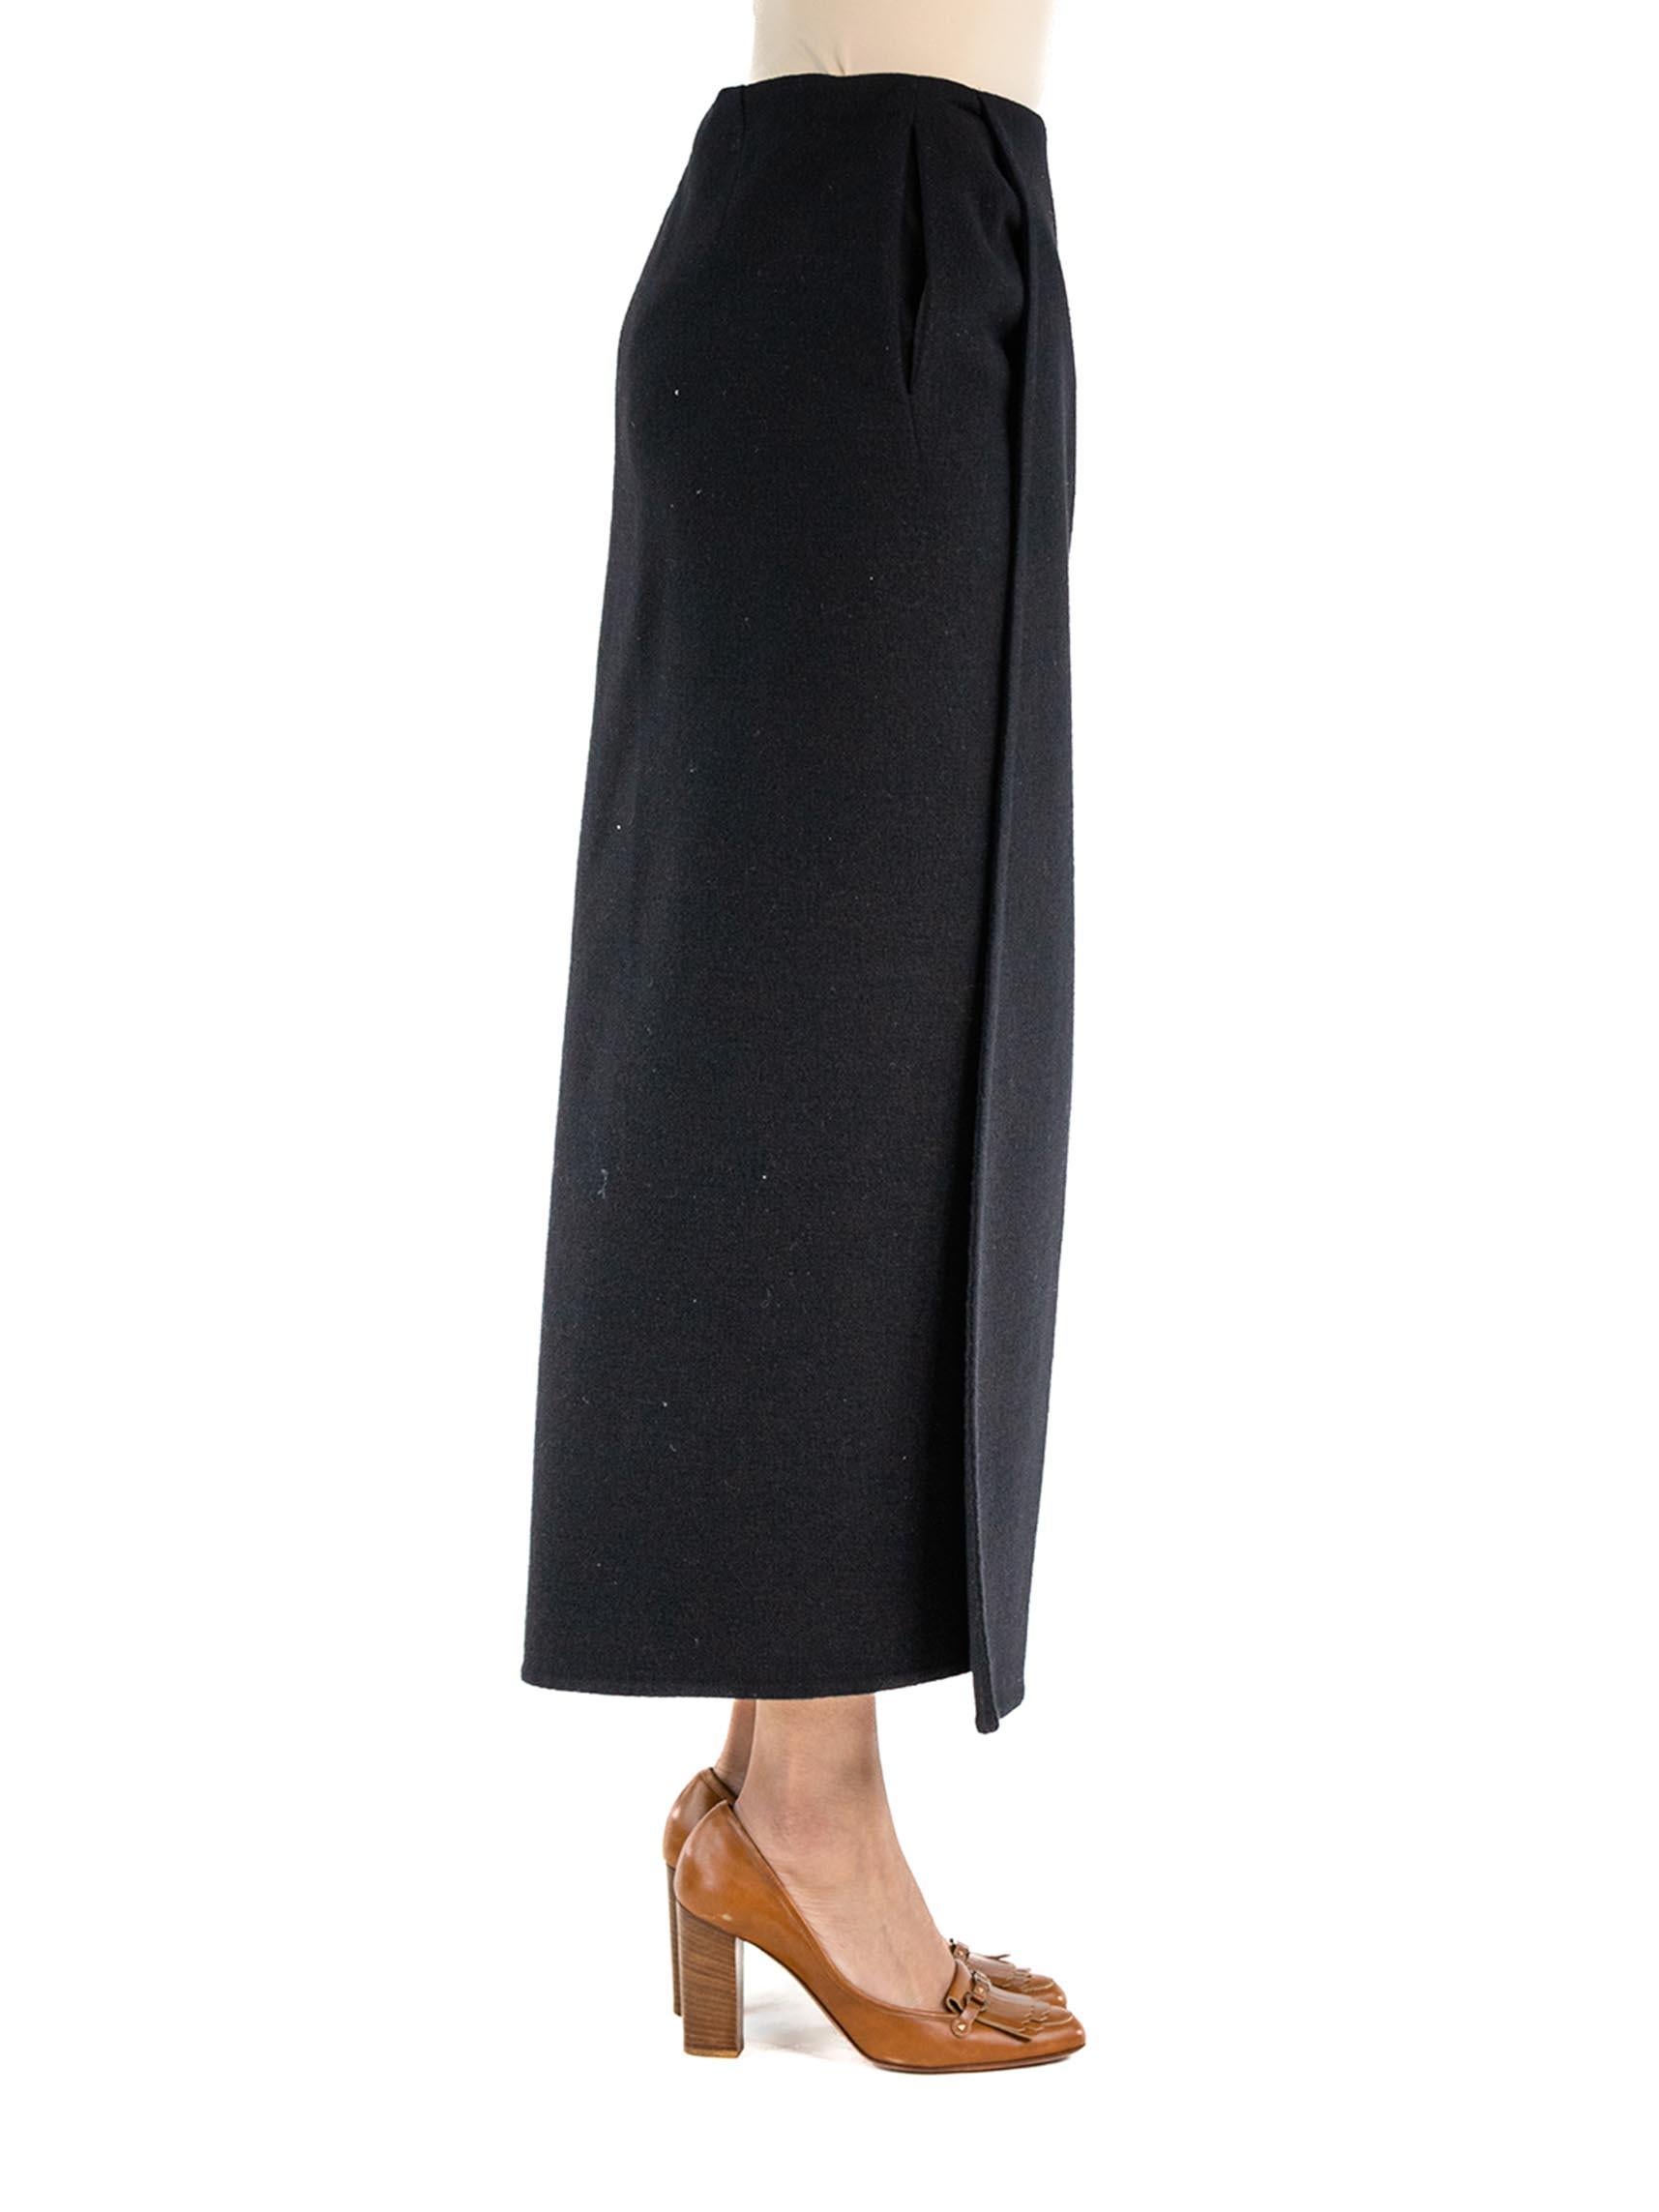 2000S DONNA KARAN Black Wool Flannel Wrap Skirt In Excellent Condition In New York, NY